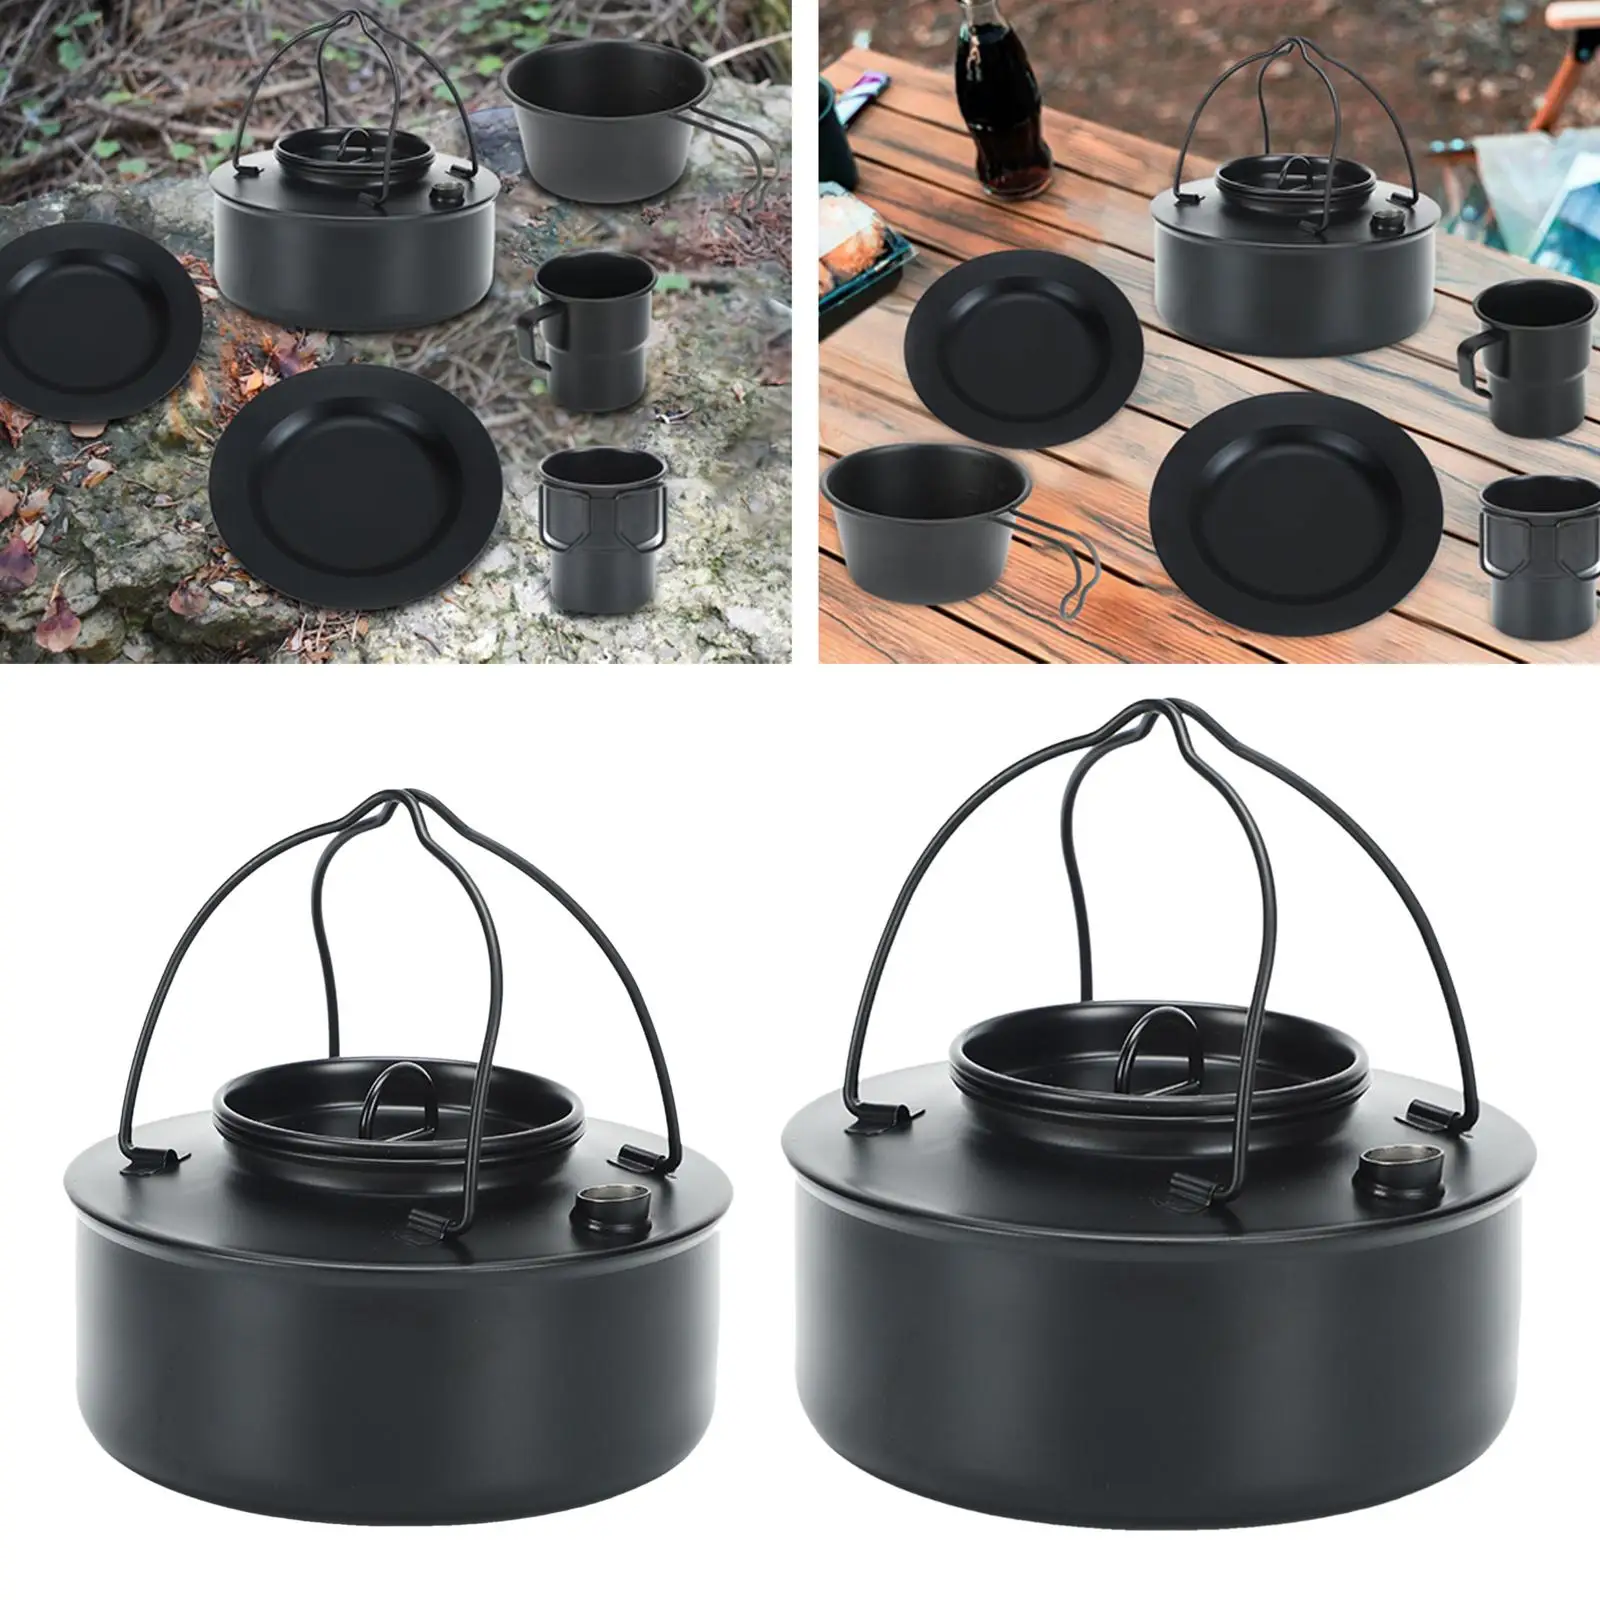 Portable Camping Stovetop Kettle Teapot Teakettle with Handle Campfire Cookware Outdoor Tea Coffee Pot for Fishing Barbecue